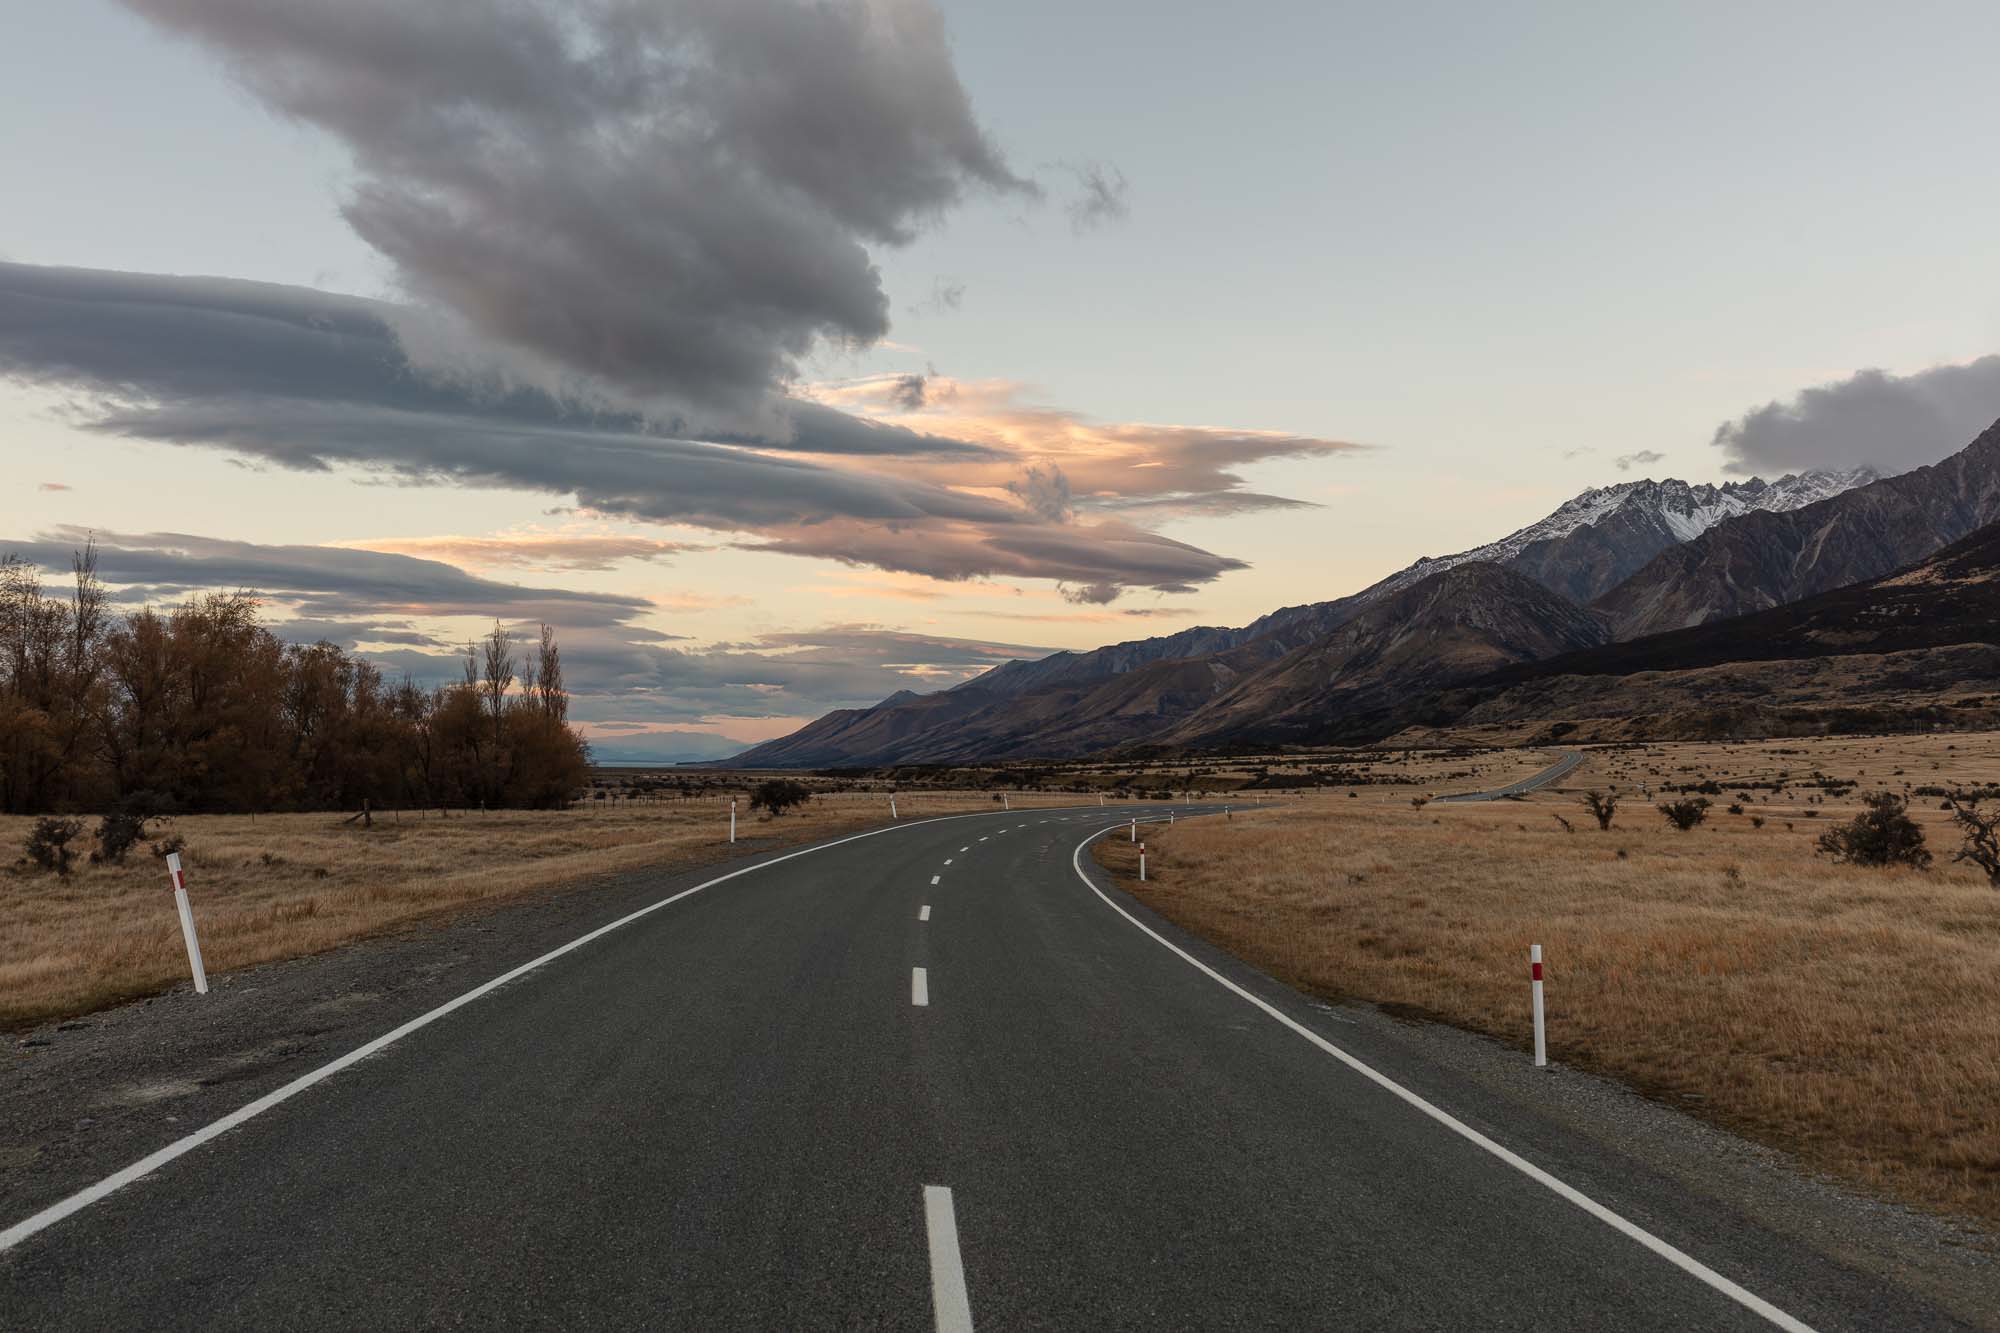 A serene landscape photograph of a road in New Zealand with Aoraki/Mt Cook in the background under a twilight sky with dynamic cloud formations.